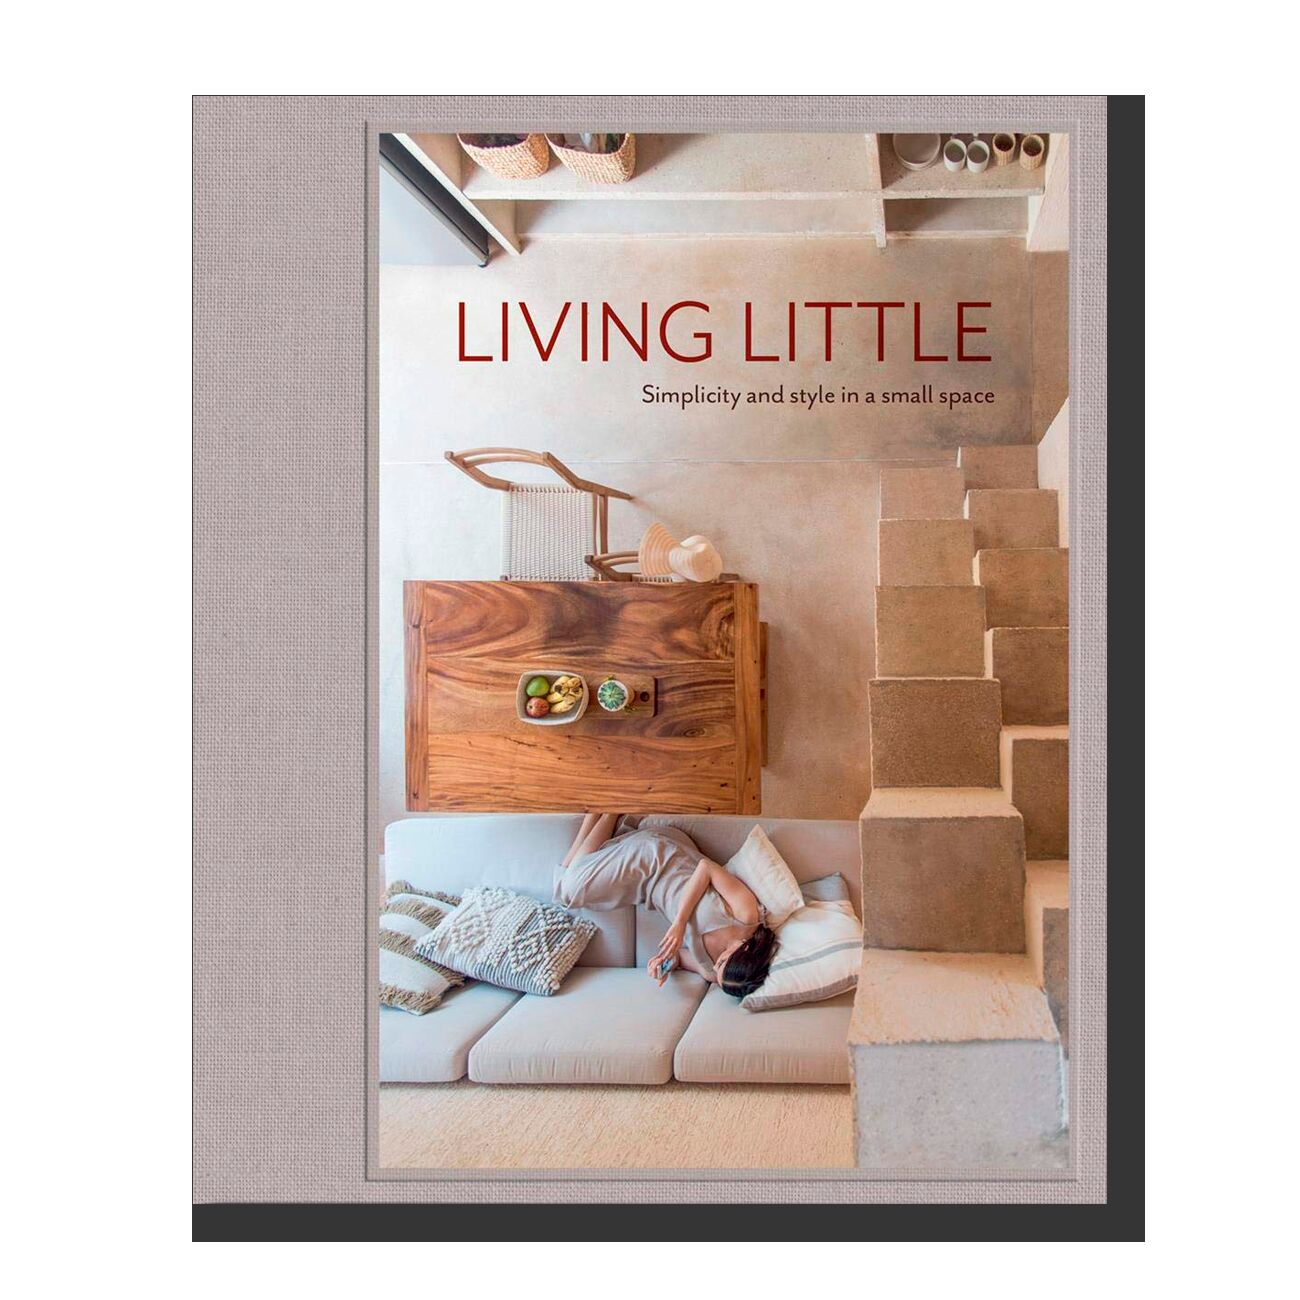 Living Little: Simplicity and style in a small space